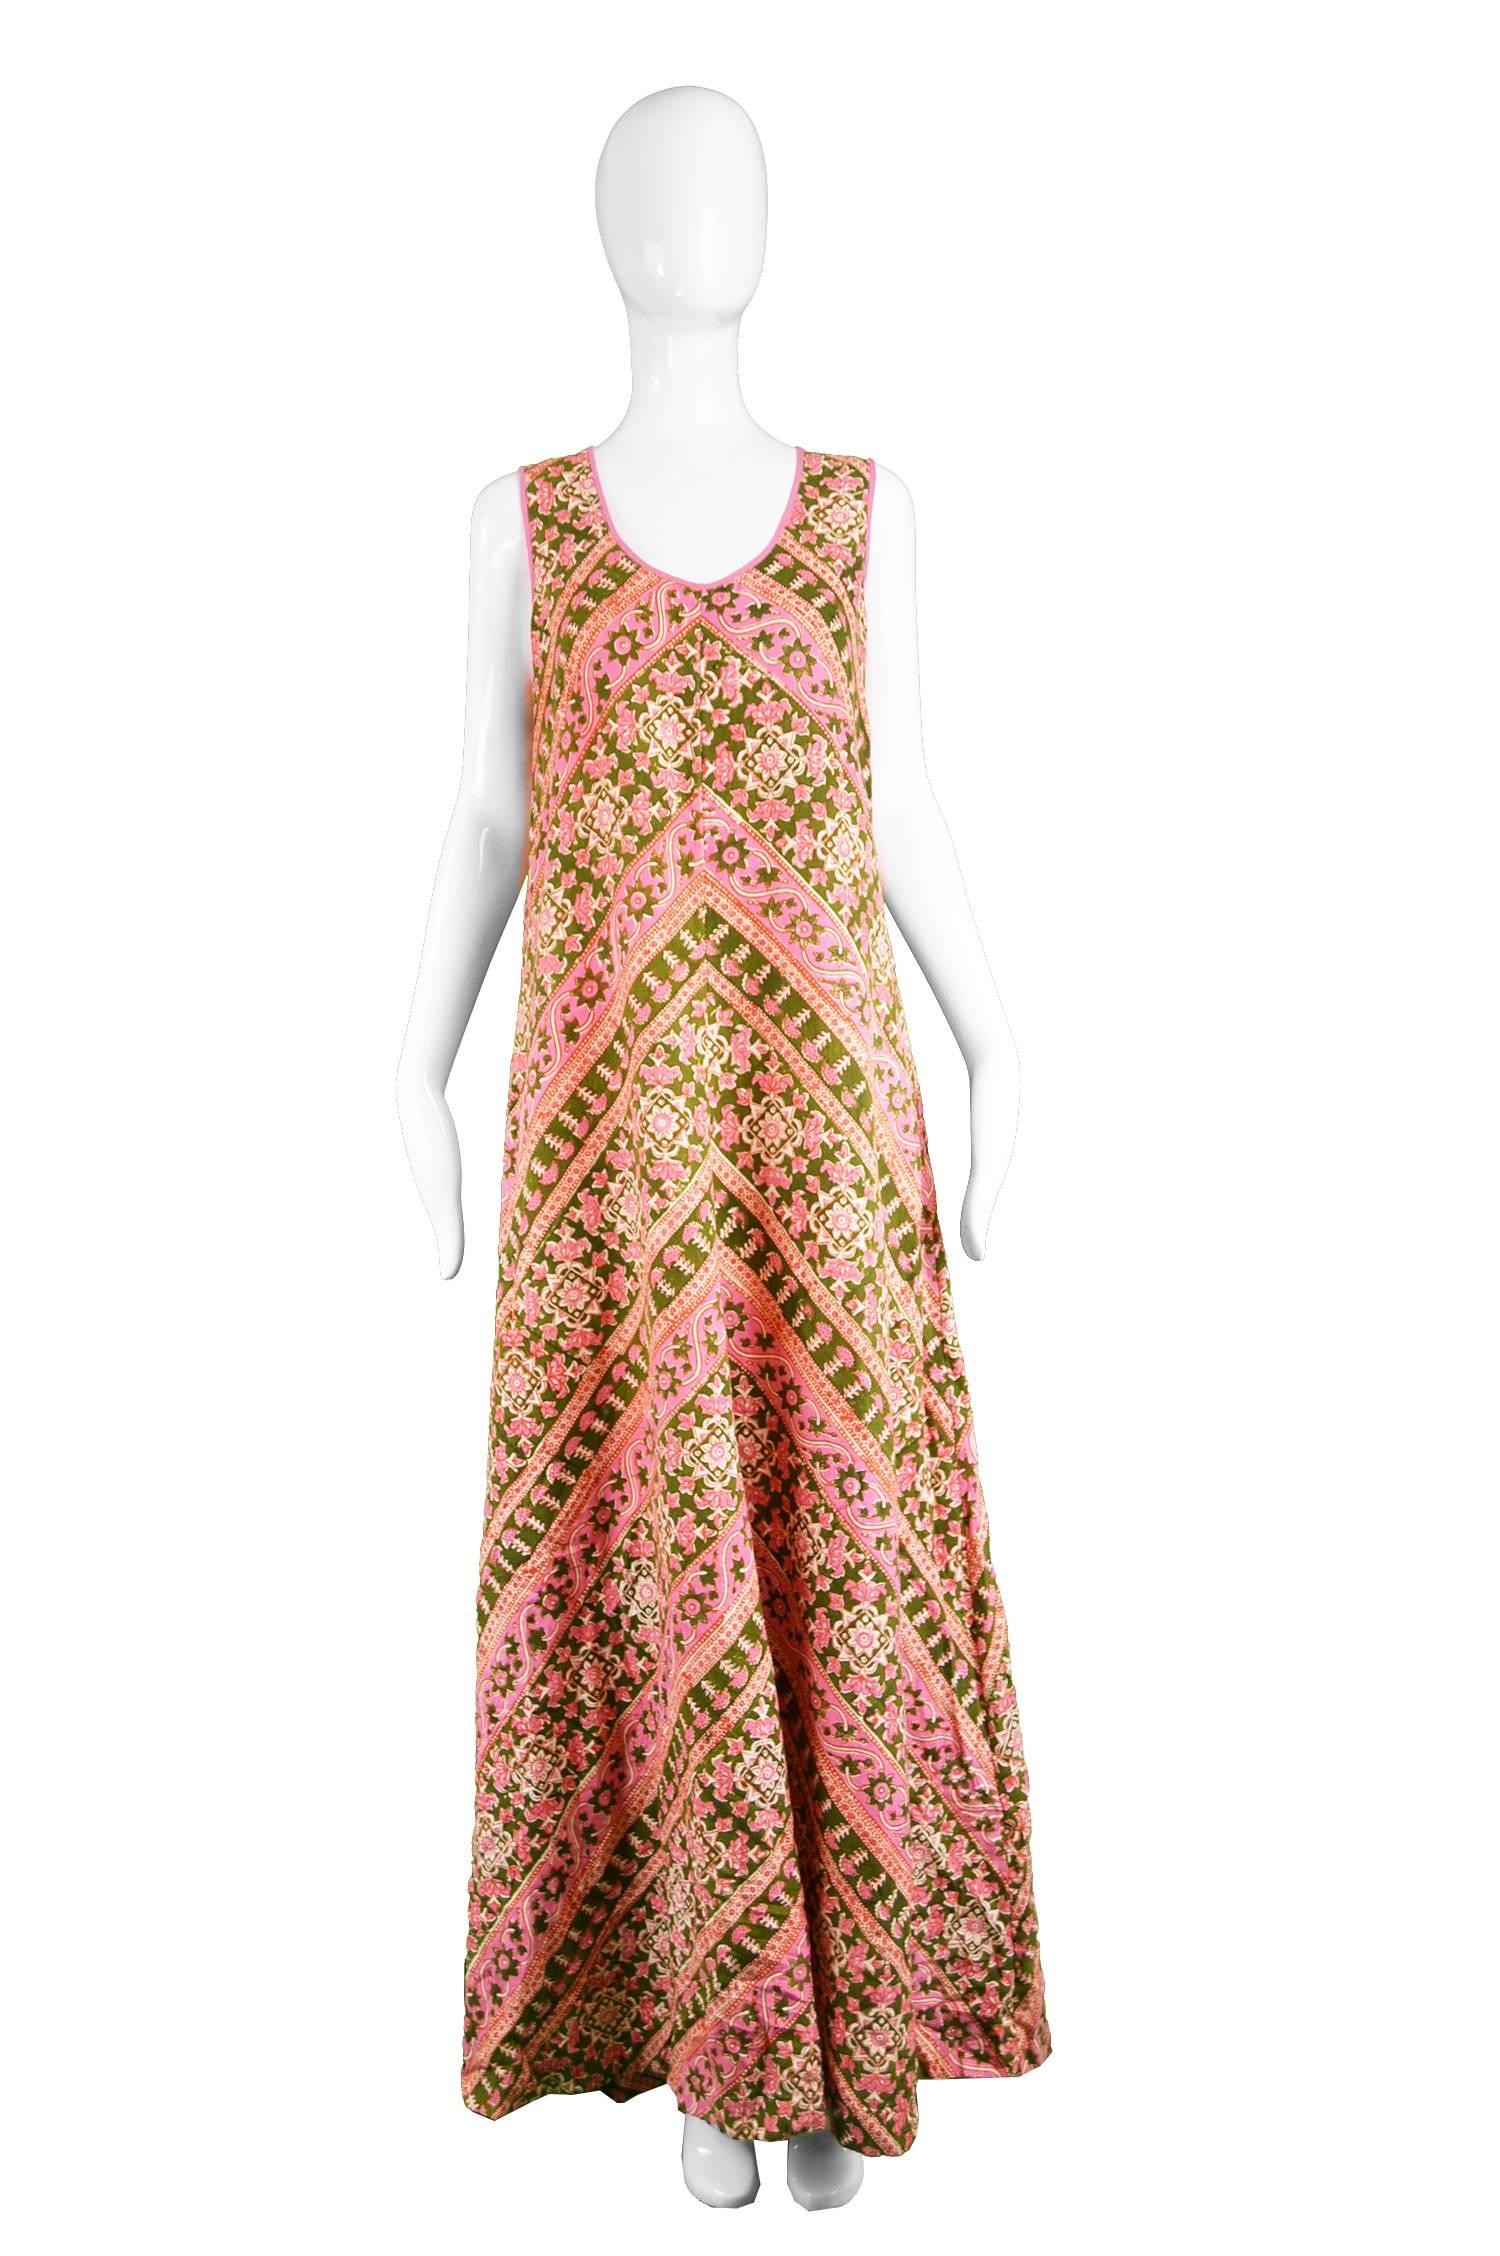 A beautiful vintage maxi dress from the 70s by legendary Indian cotton designer, Anokhi. In a soft pink and green block printed Indian cotton lawn which gives a bohemian luxe look which is furthered by the long, sleeveless column silhouette which